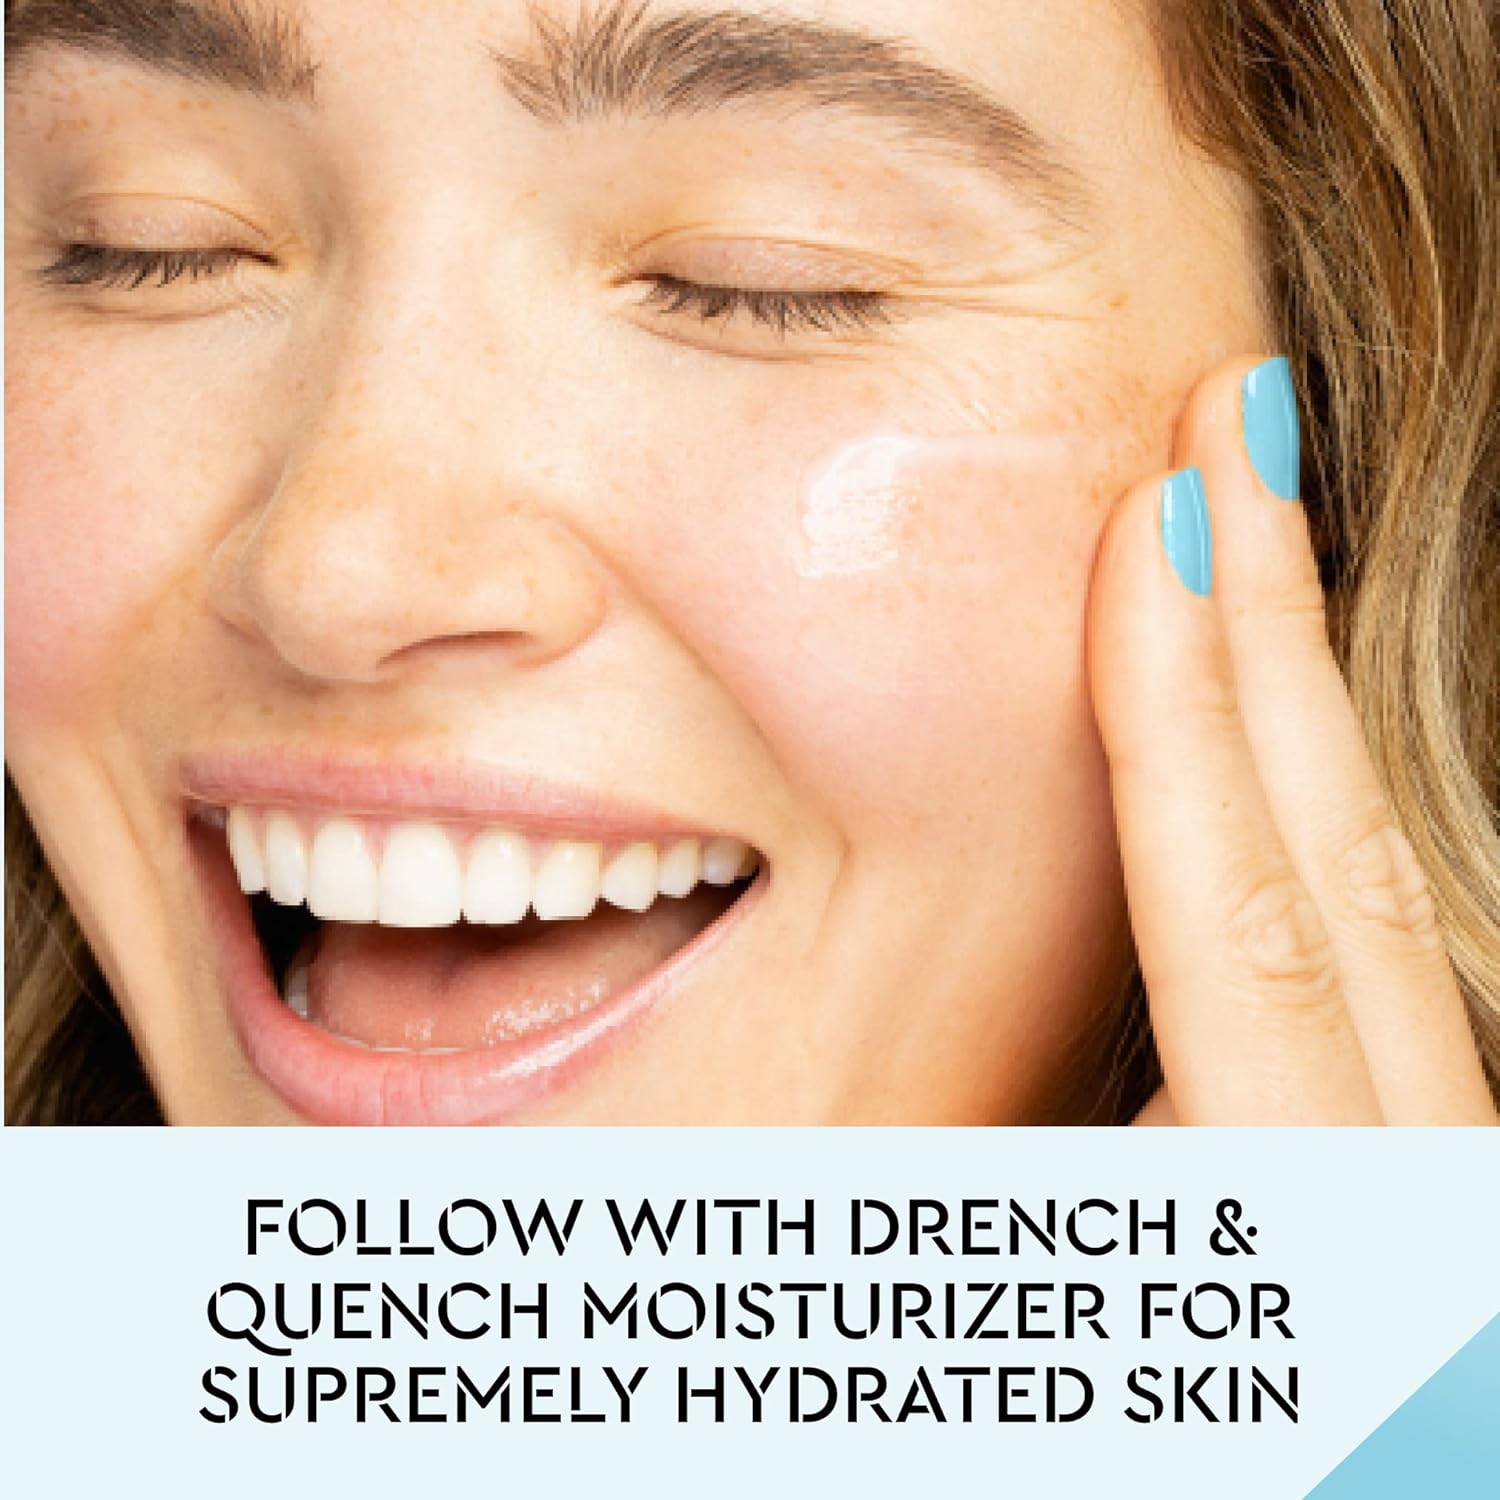 Bliss Drench & Quench Daily Hydrating Serum - 1 Fl Oz - 4 Types of Hyaluronic Acid - Deeply Moisturizes Skin for All-Day Hydration - Clean - Vegan & Cruelty-Free : Everything Else